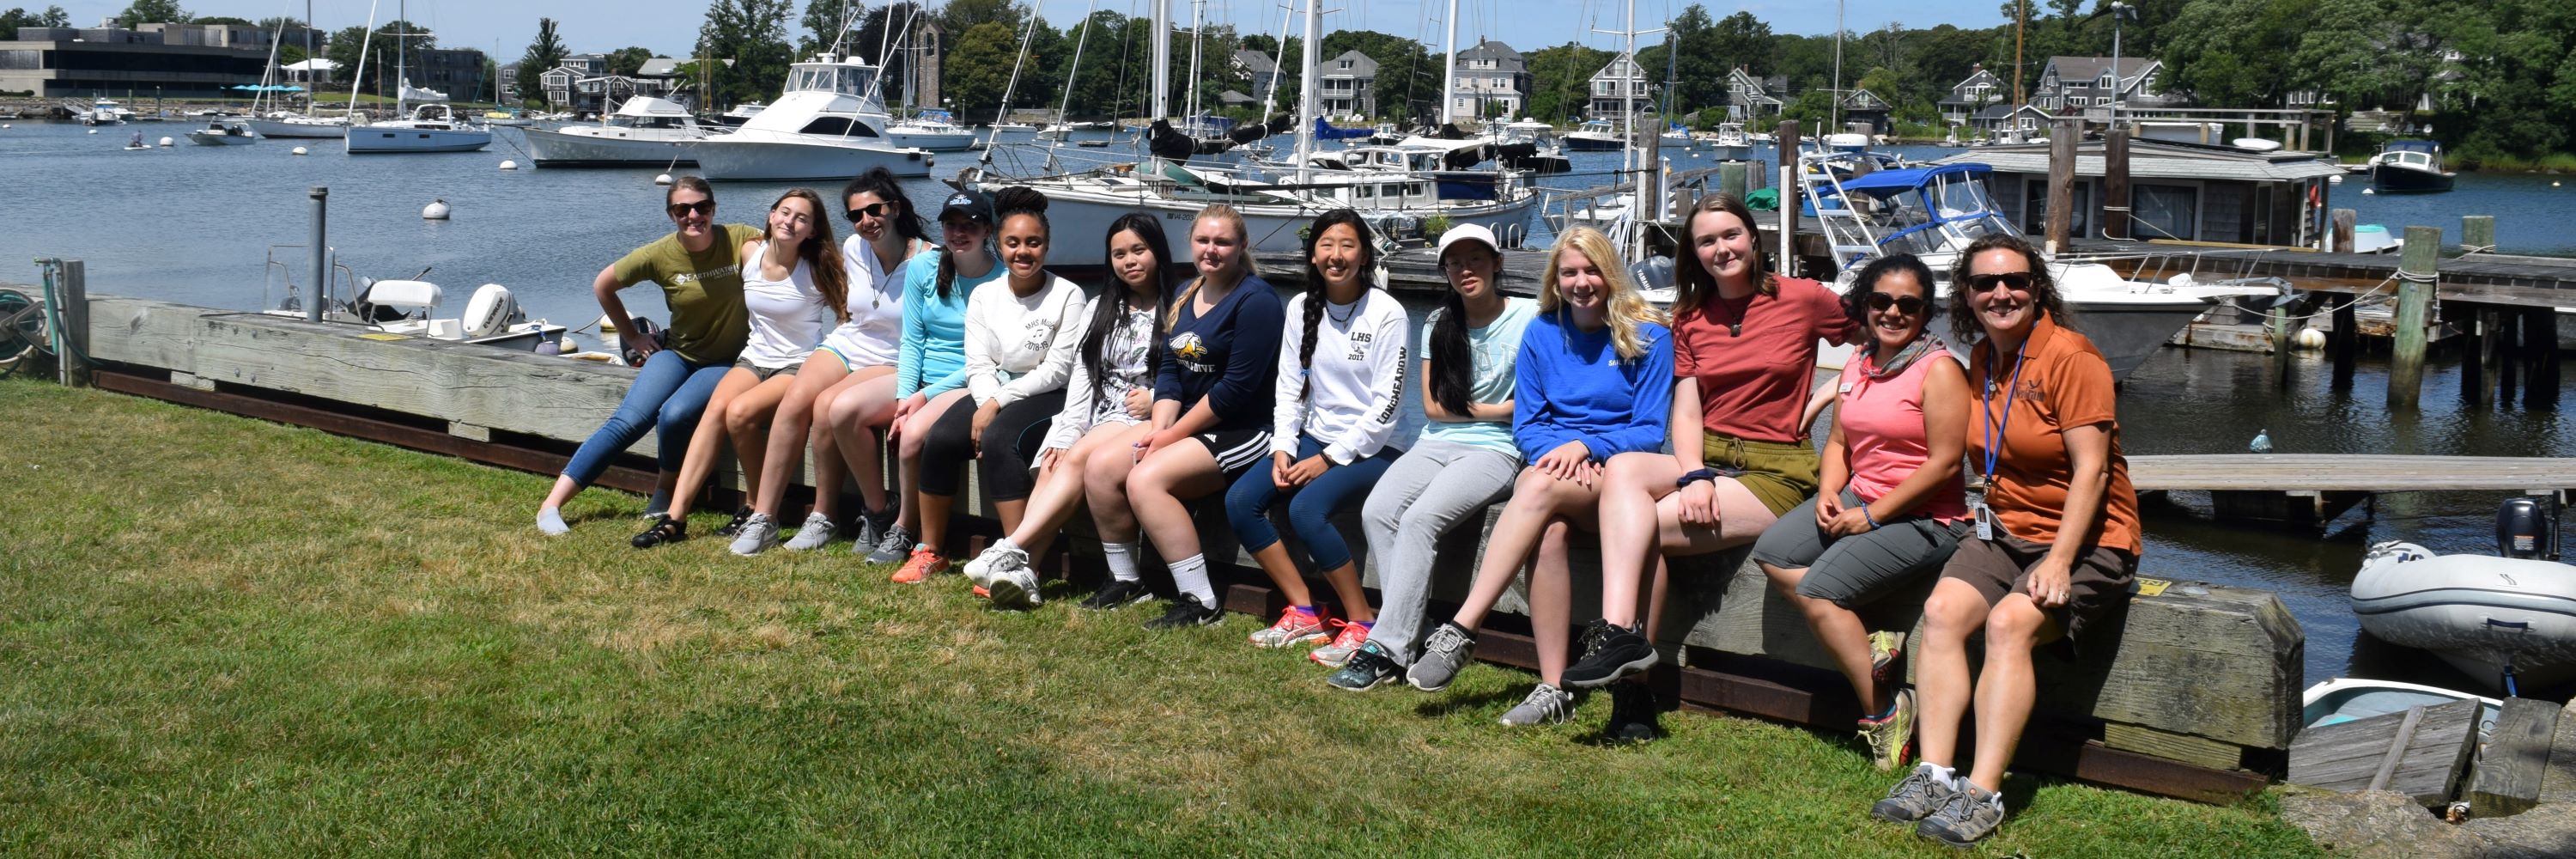 The 2019 Girls in Science team. (Courtesy WHOI)